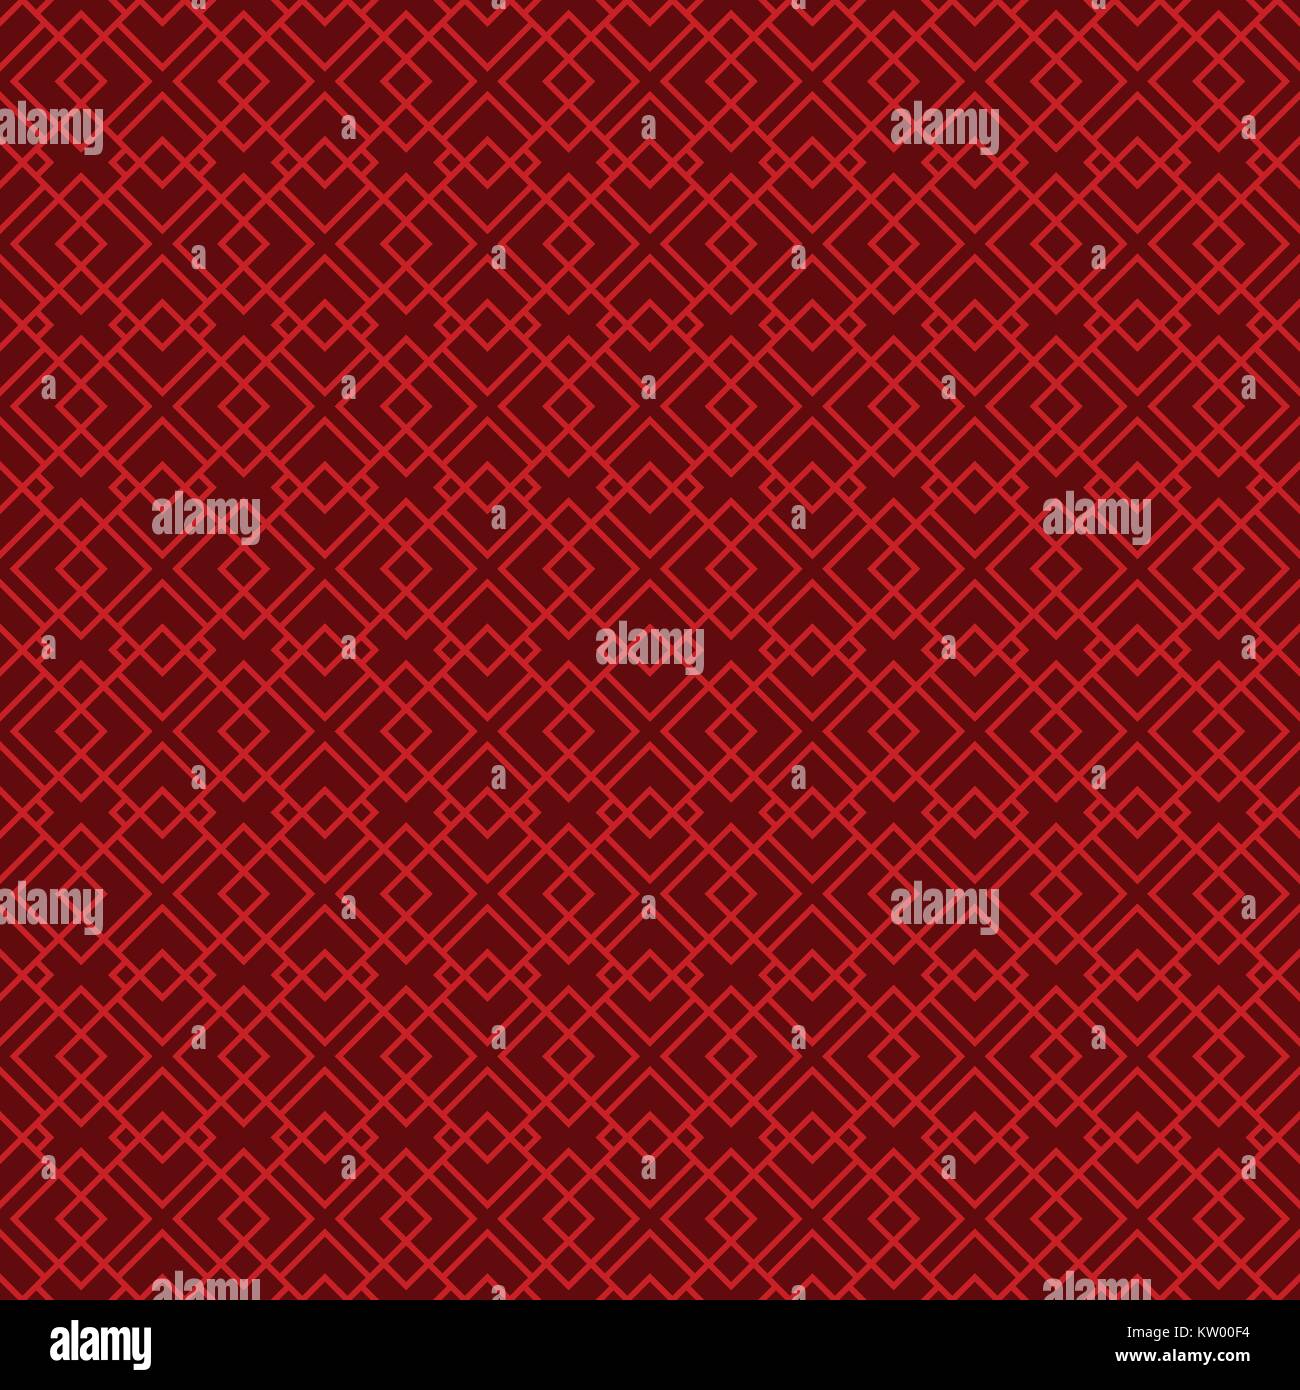 Seamless vintage Chinese window tracery diamond check pattern background. Stock Vector